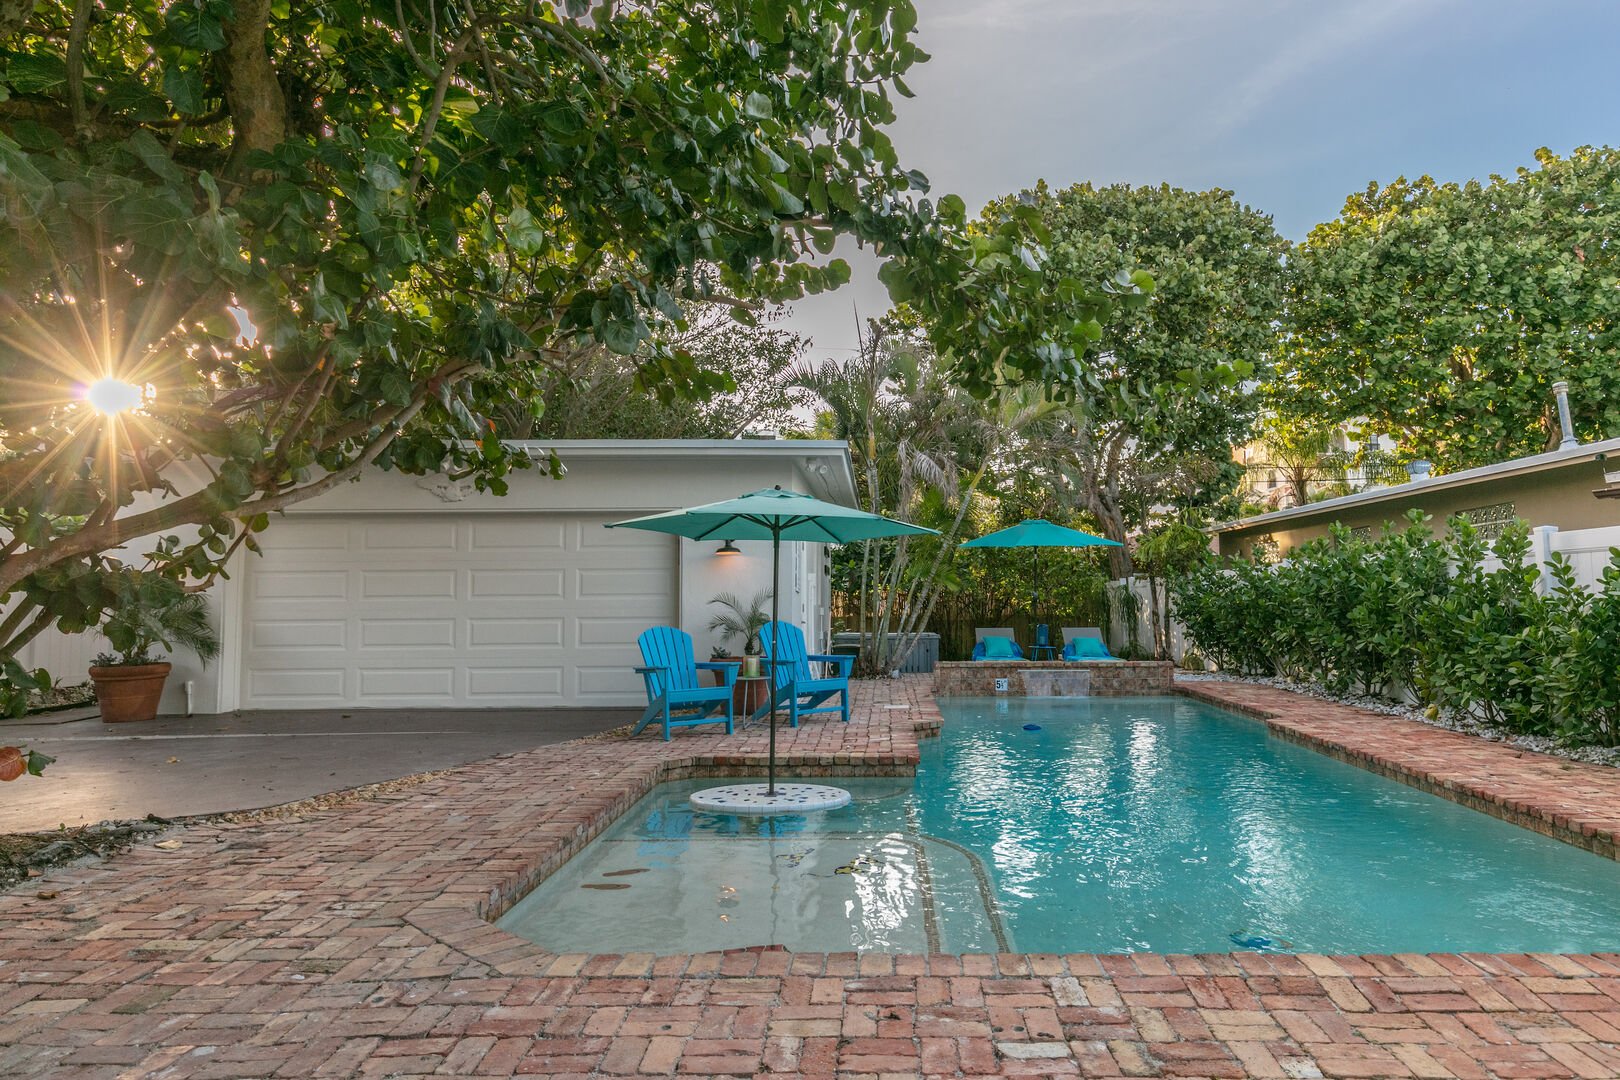 TWO houses, ONE Property! Many amenities, including a Game Room, Heated Pool, and 2 Hot Tubs!